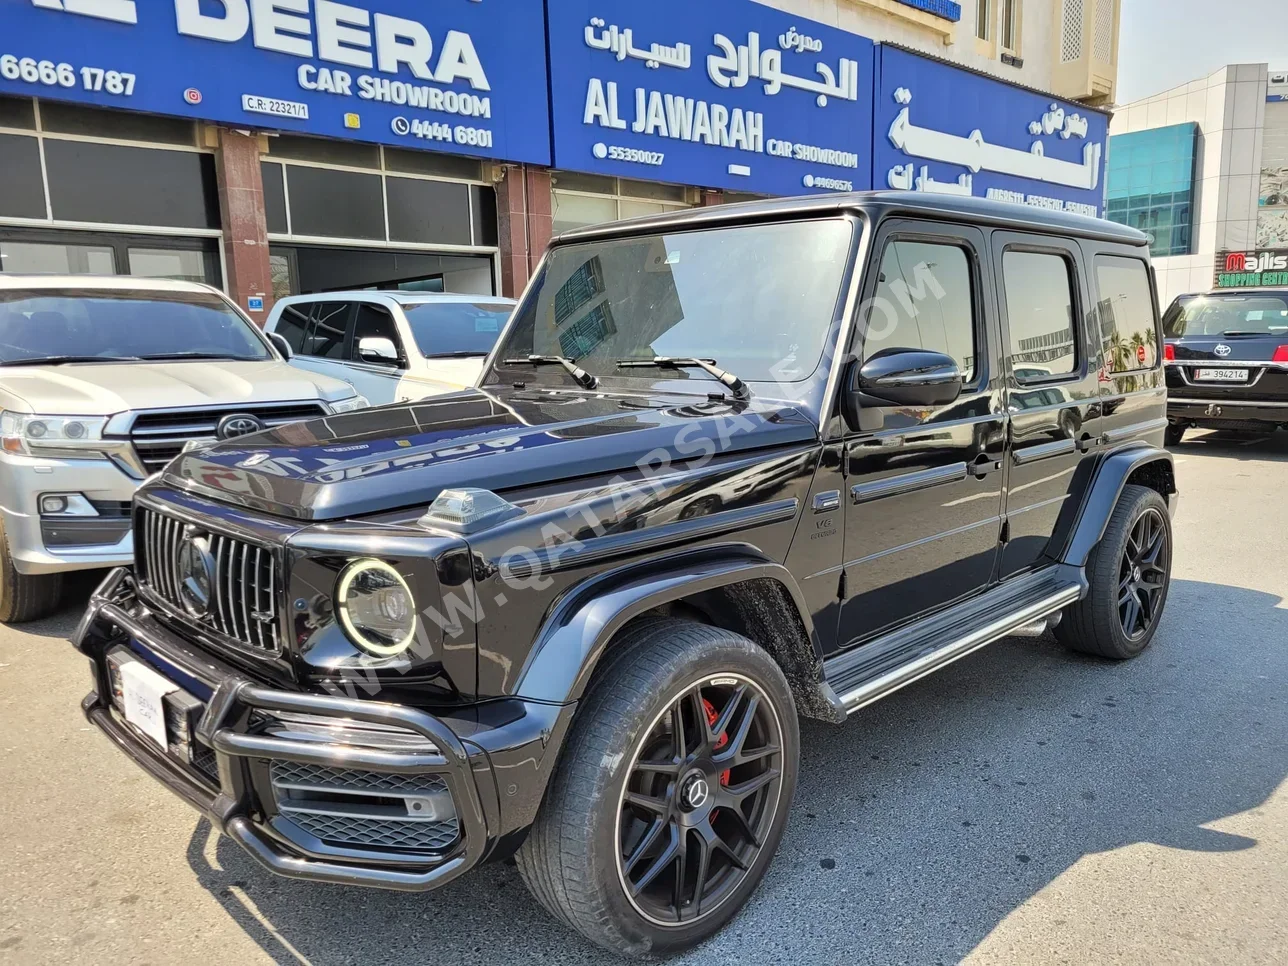 Mercedes-Benz  G-Class  63 AMG  2019  Automatic  121,000 Km  8 Cylinder  Four Wheel Drive (4WD)  SUV  Black